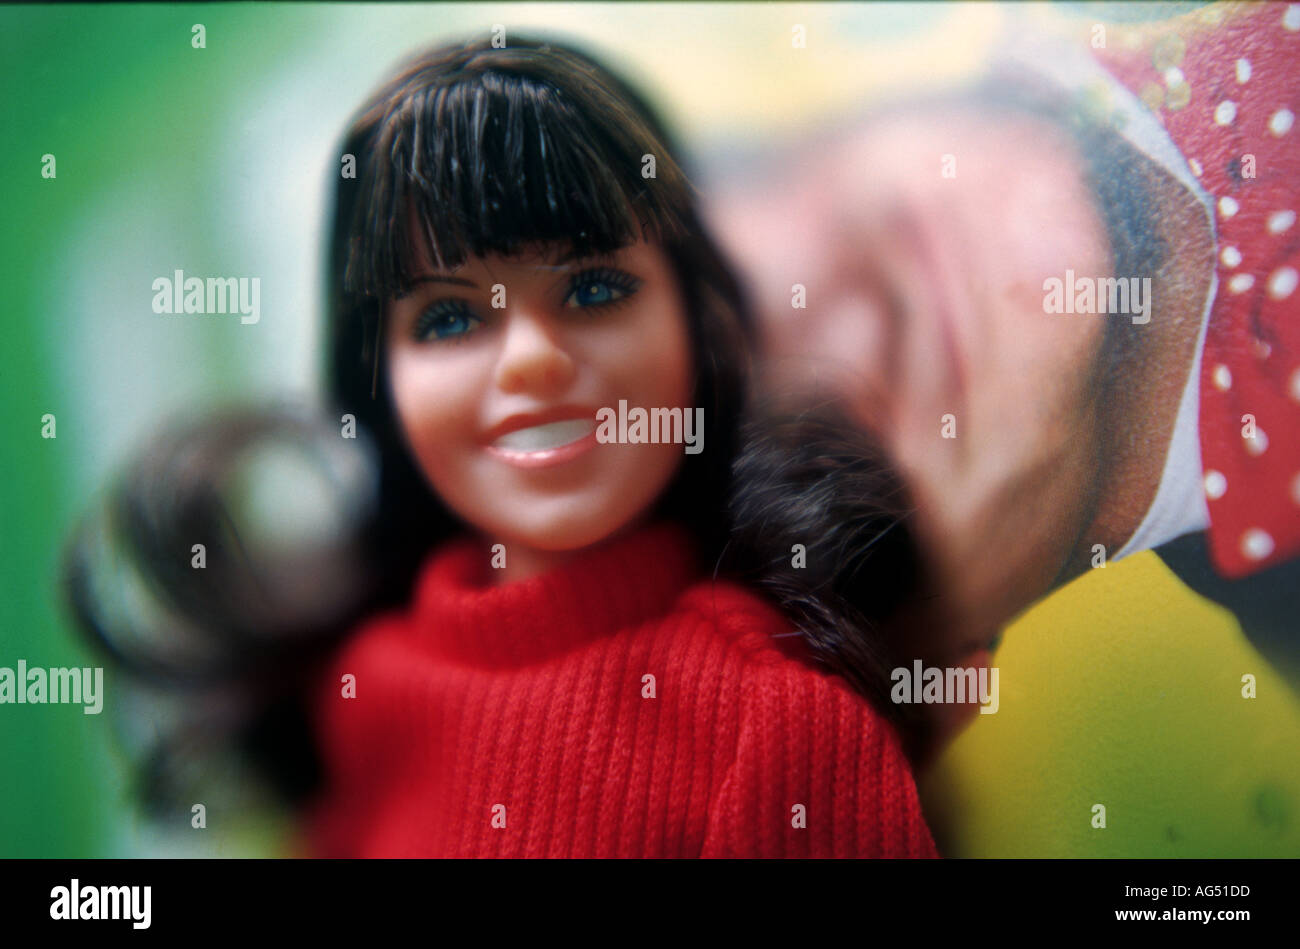 Doll of Mindy from the TV show Mork Mindy Stock Photo